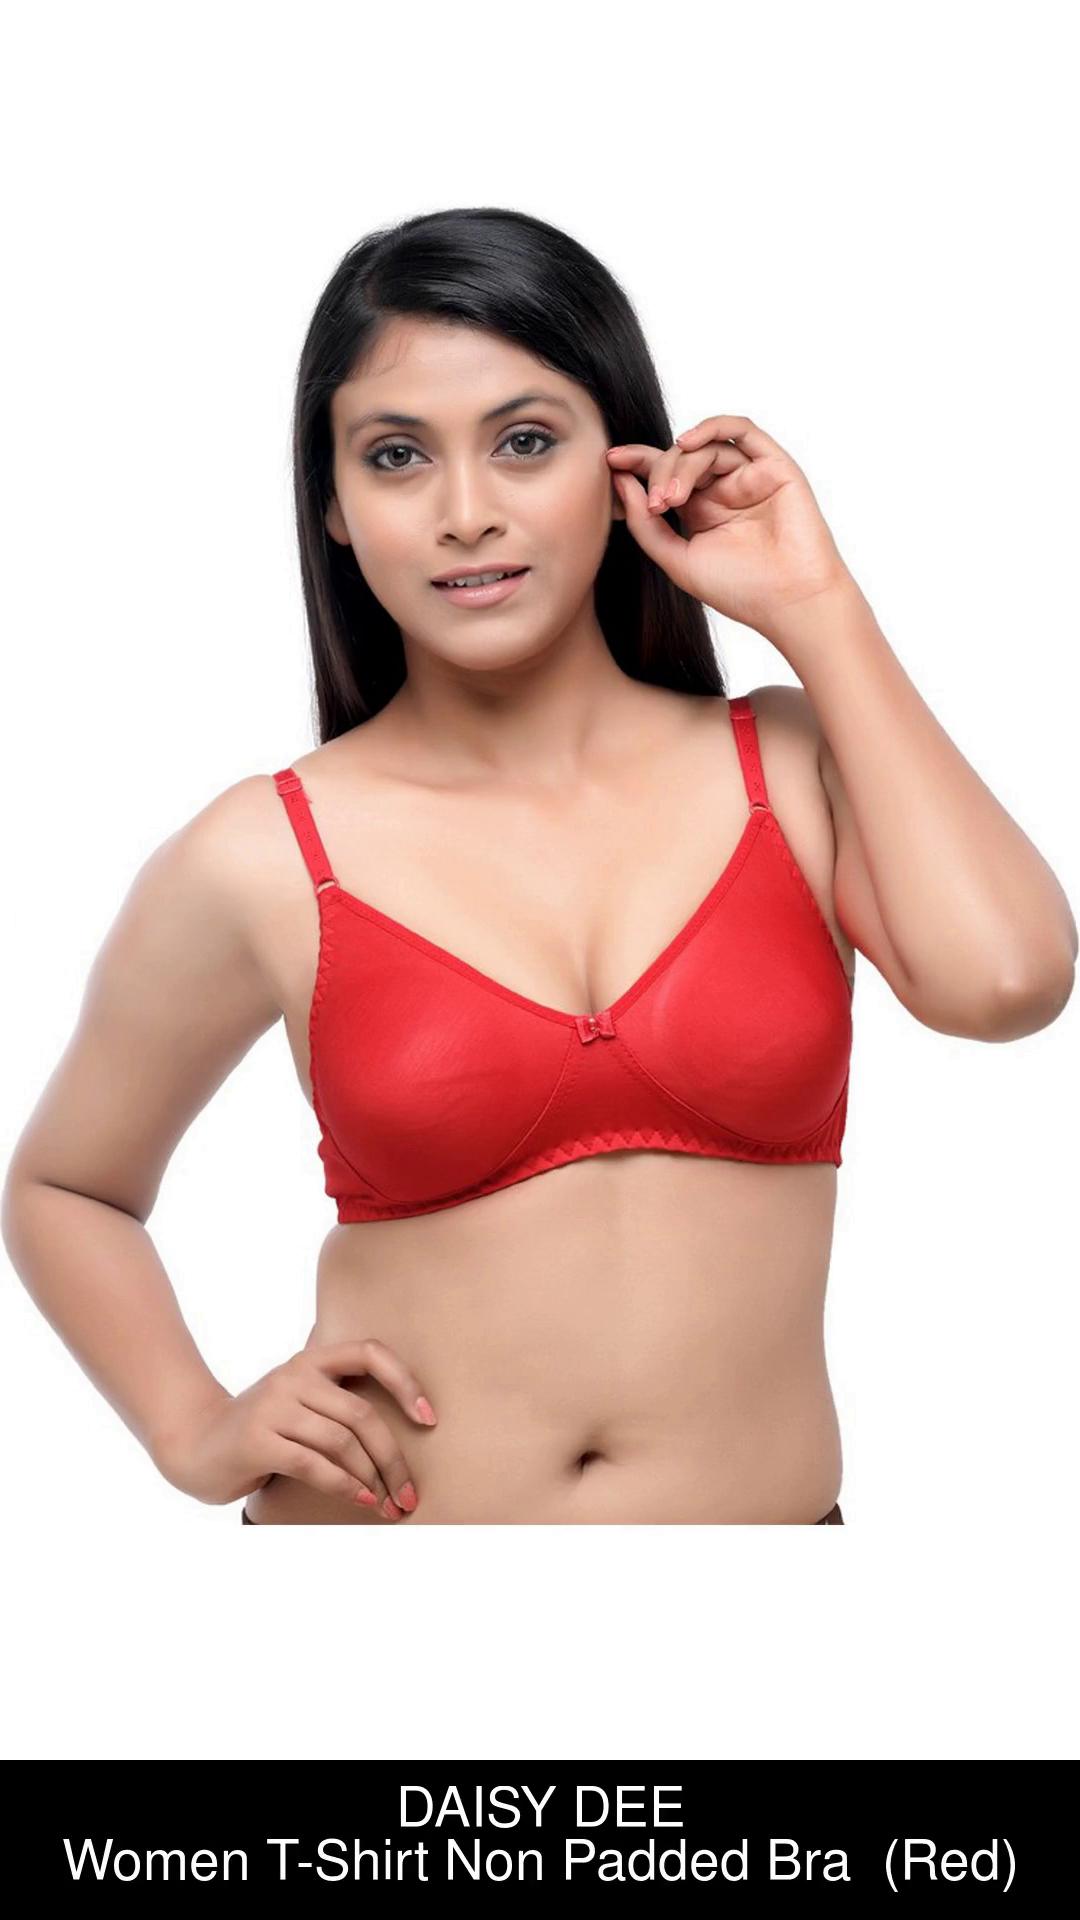 DAISY DEE DAISY DEE Women Girls Non Padded Cotton Bra in Red Color-Lopez -  RED 32B Women T-Shirt Non Padded Bra - Buy DAISY DEE DAISY DEE Women Girls  Non Padded Cotton